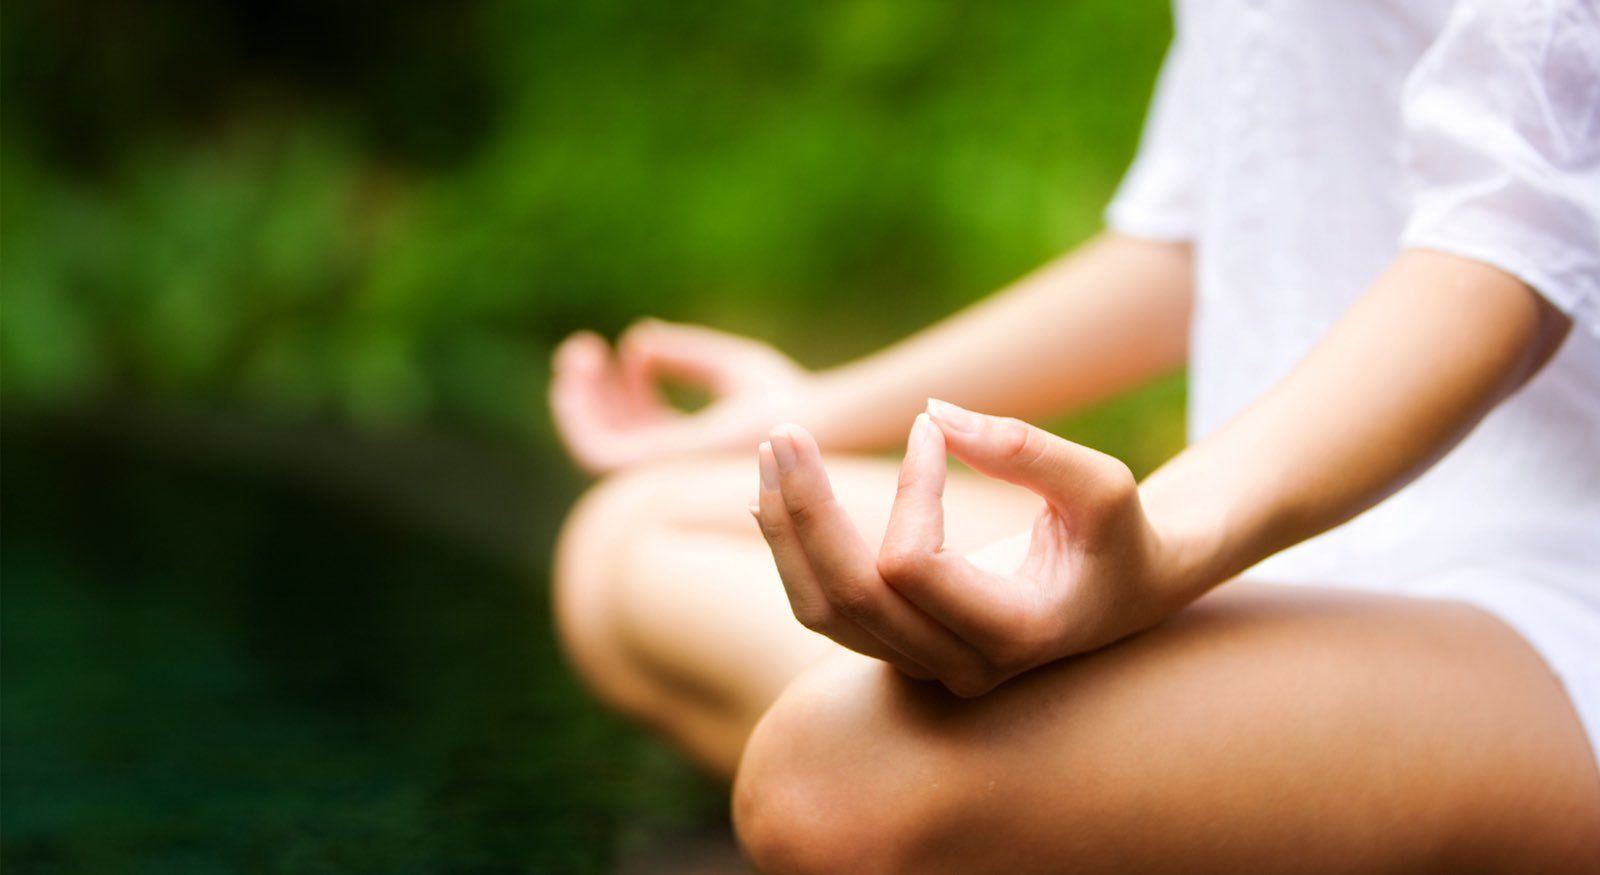 Mindful Yoga: Using Mindfulness to Release Tension, Meditate and